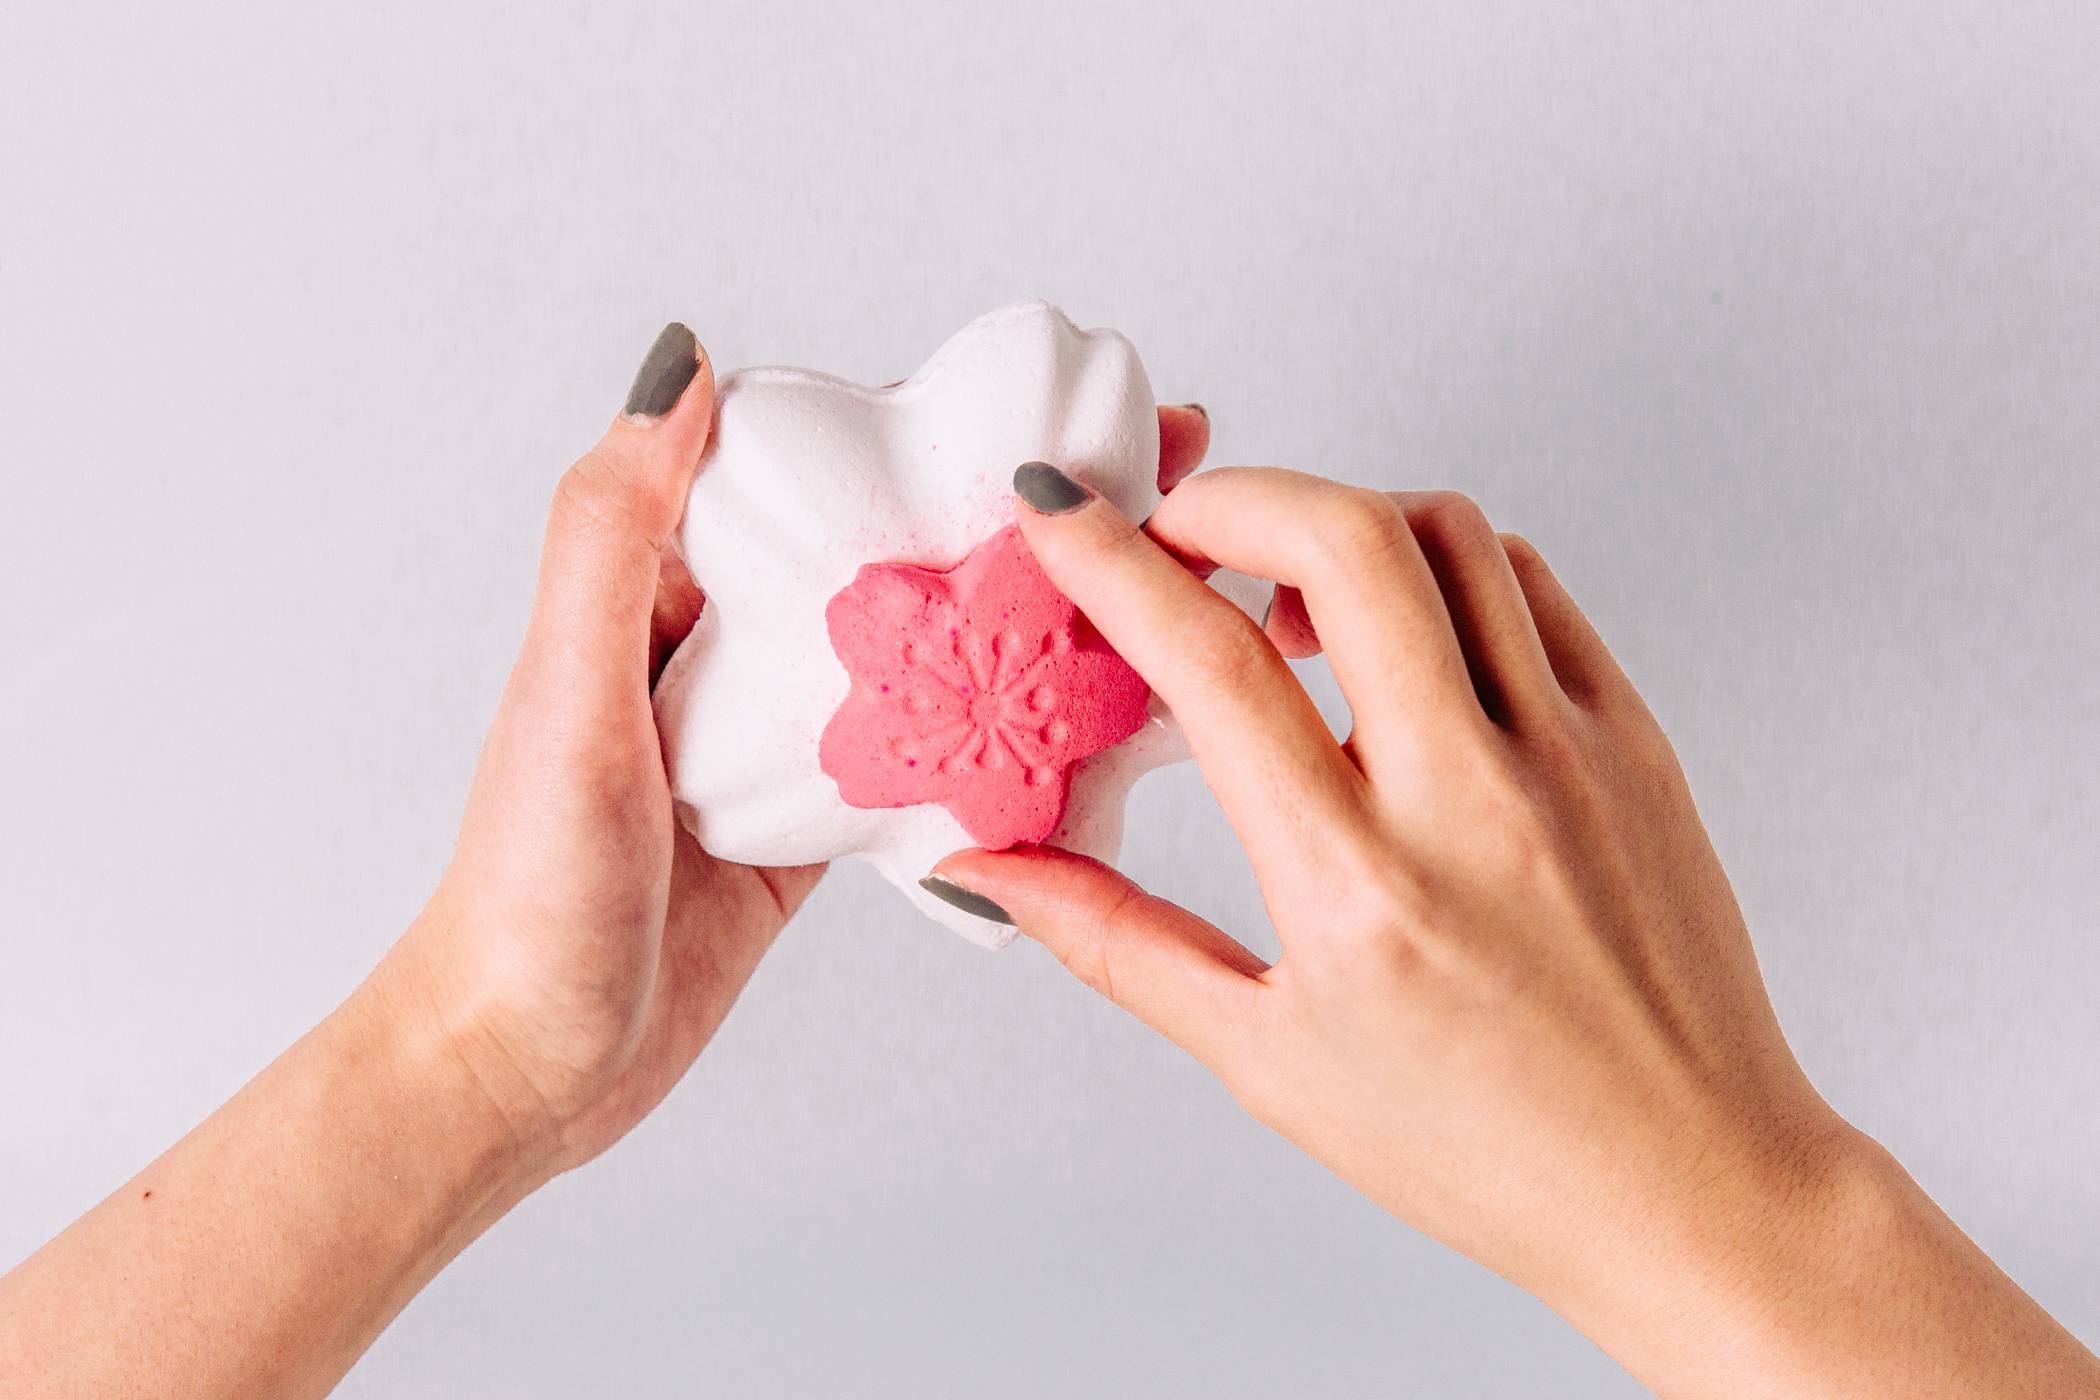 A close-up image of the mode's hands as they begin to separate the deep pink lip from the white main bath bomb body.